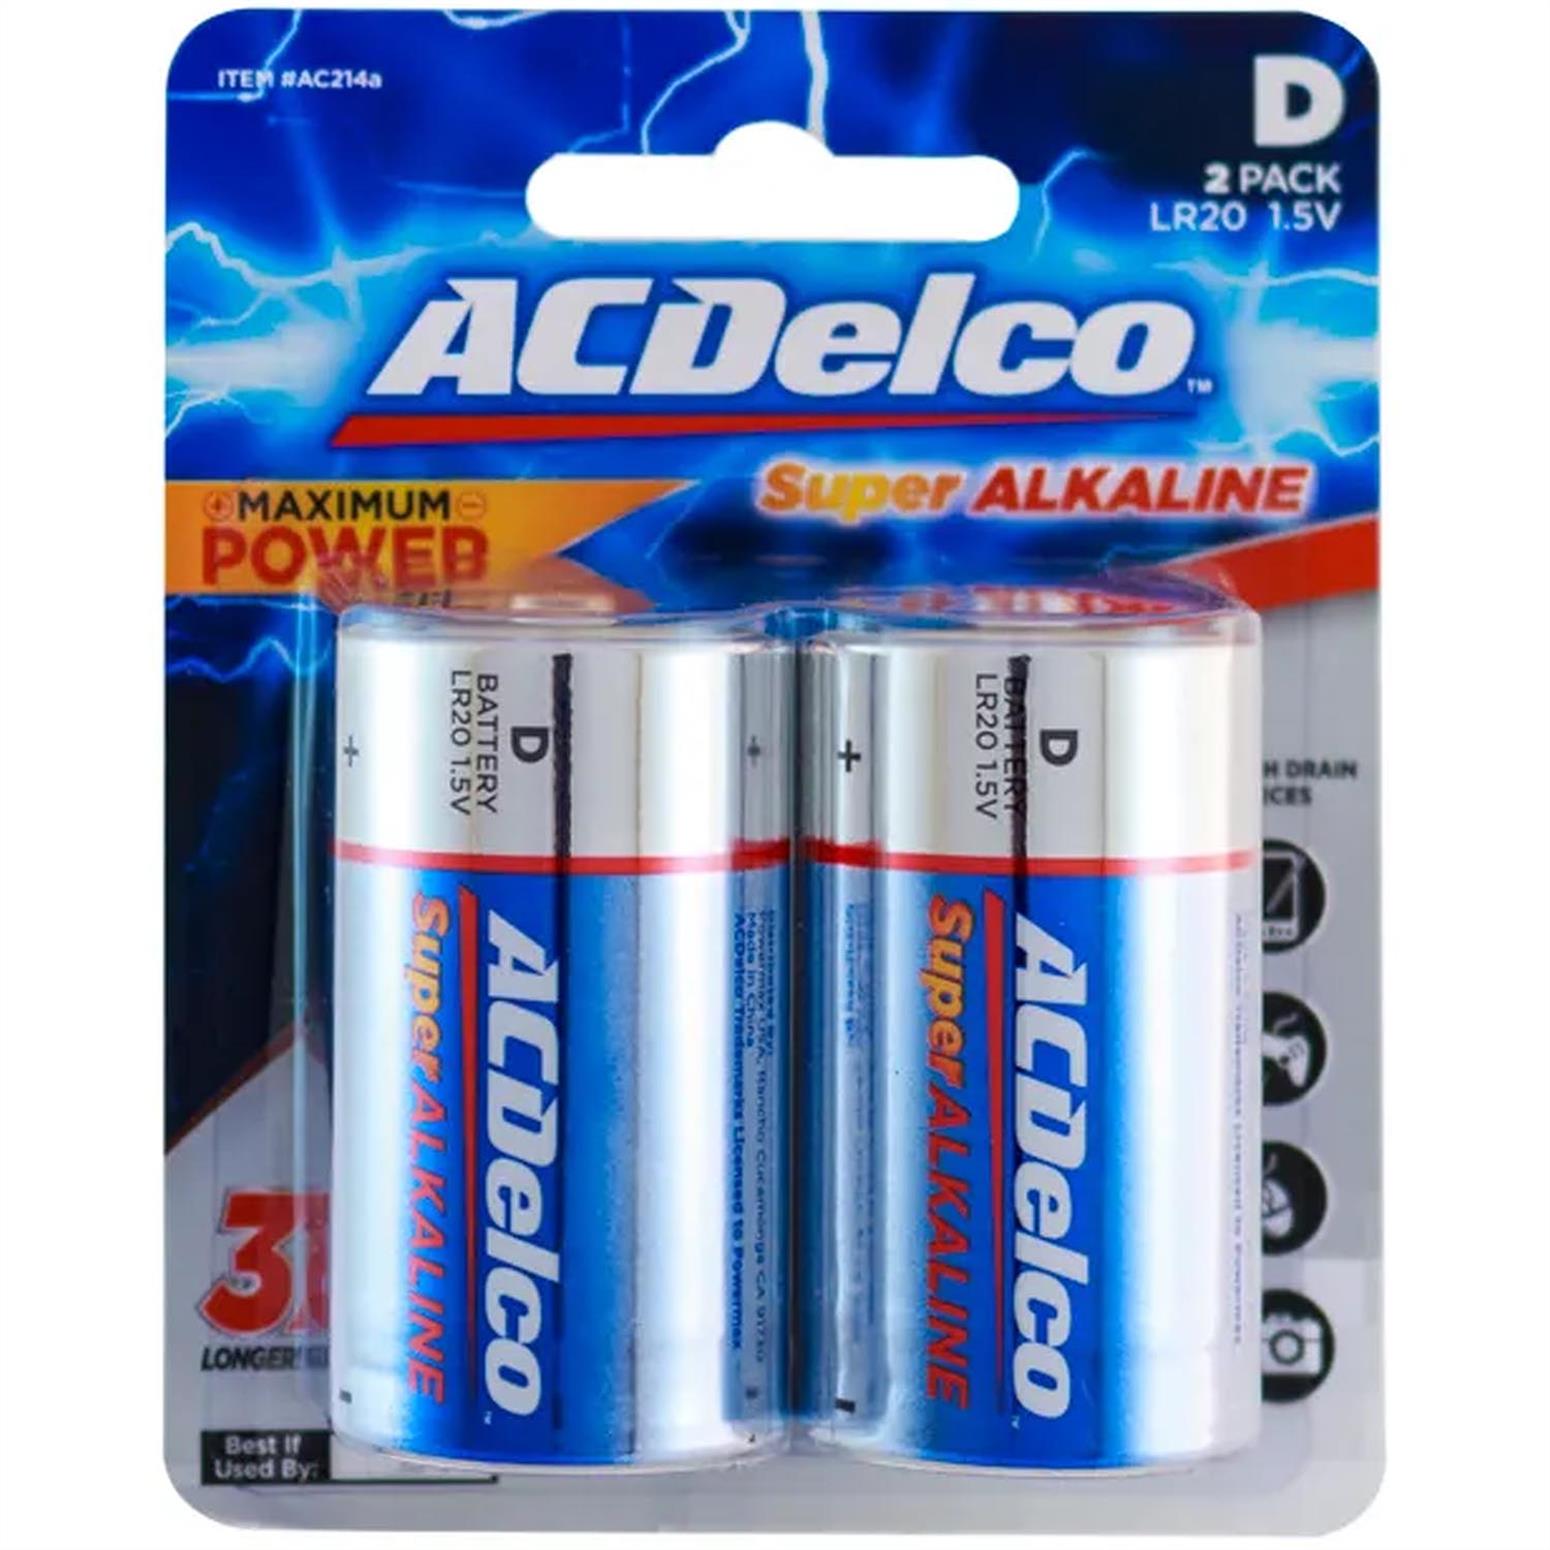 ACDelco Alkaline Battery 2D 1.5V, Pack of 2 Pieces